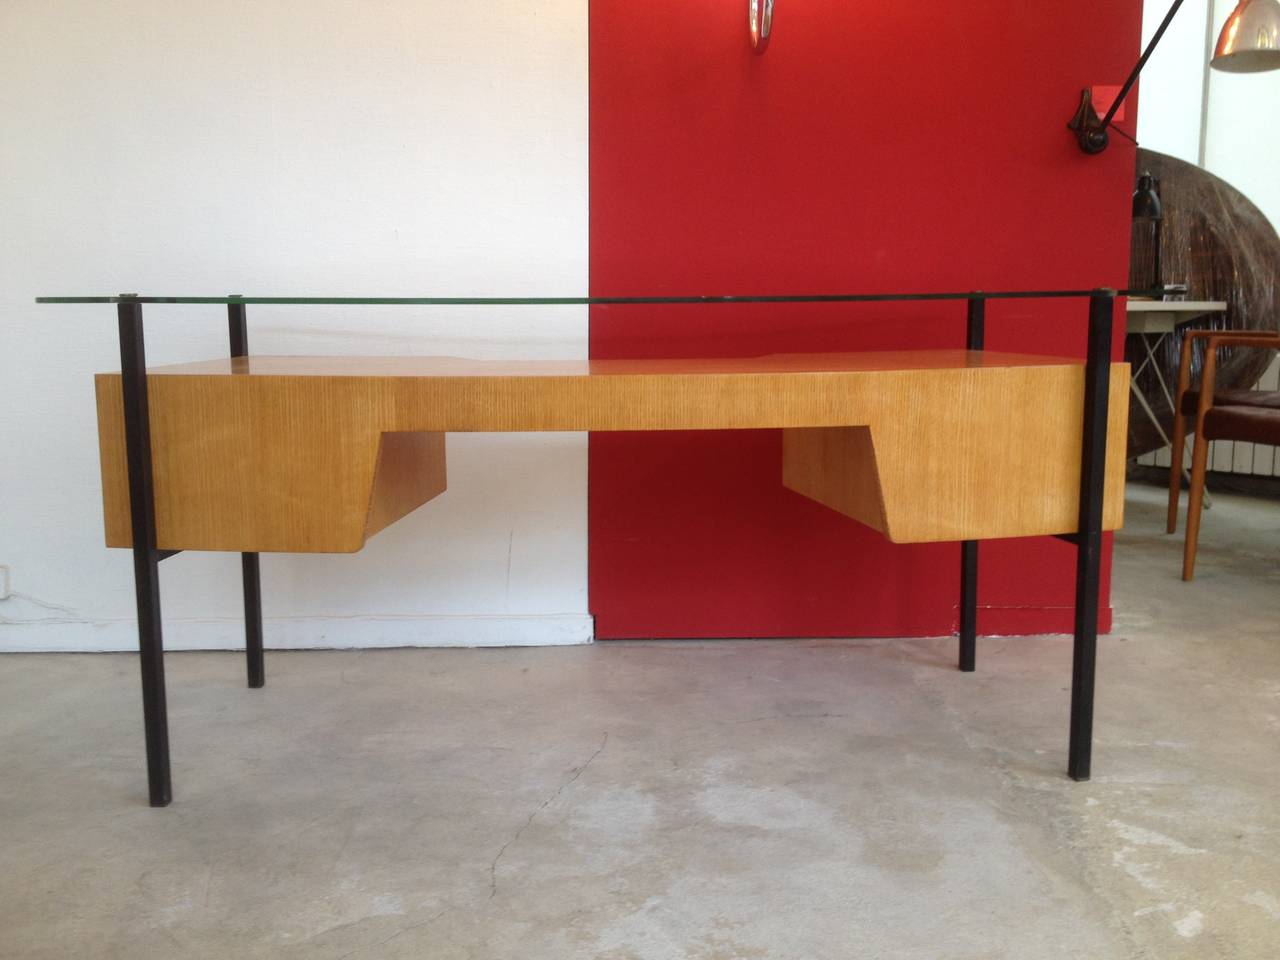 very rare desk designed by Jacques Hitier
edited by La Méridienne in 1955
ash wood, pair of metal handles in butterfly position
Original Curved Safety Glass 66.1  x 28.35 inch

Bibliographie : Les Décorateurs des années 50, de Patrick